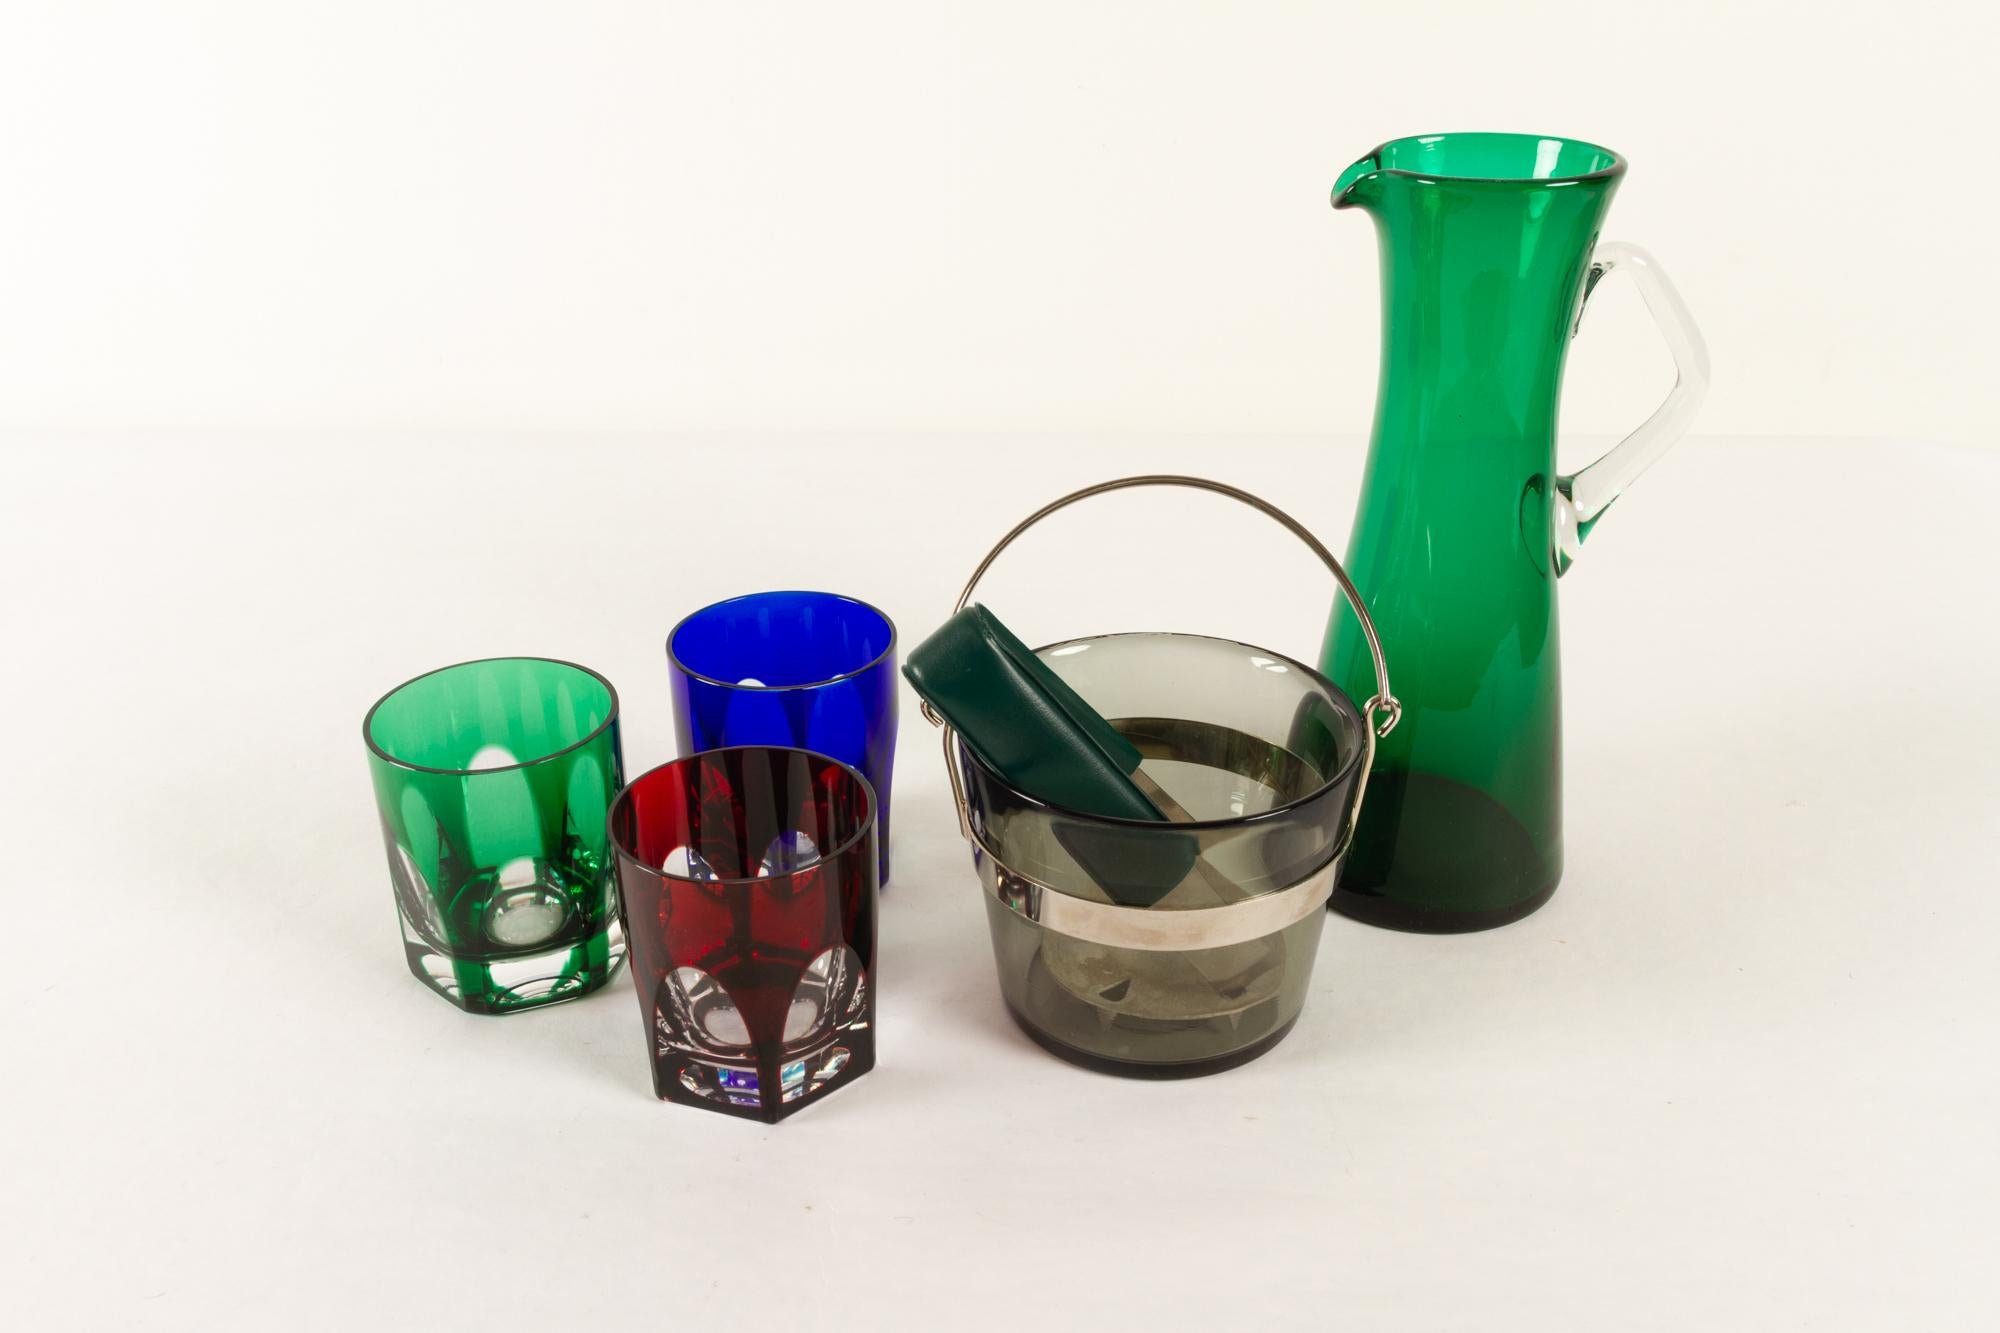 Vintage Swedish glassware 1960s Set 5
Mid-century modern barware. A stylish and colorful addition to the bar cart or bar cabinet.
This set consists of:
1 Pitcher in green glass, height 24.5 cm
3 Whiskey glasses, red, blue and green, height 9